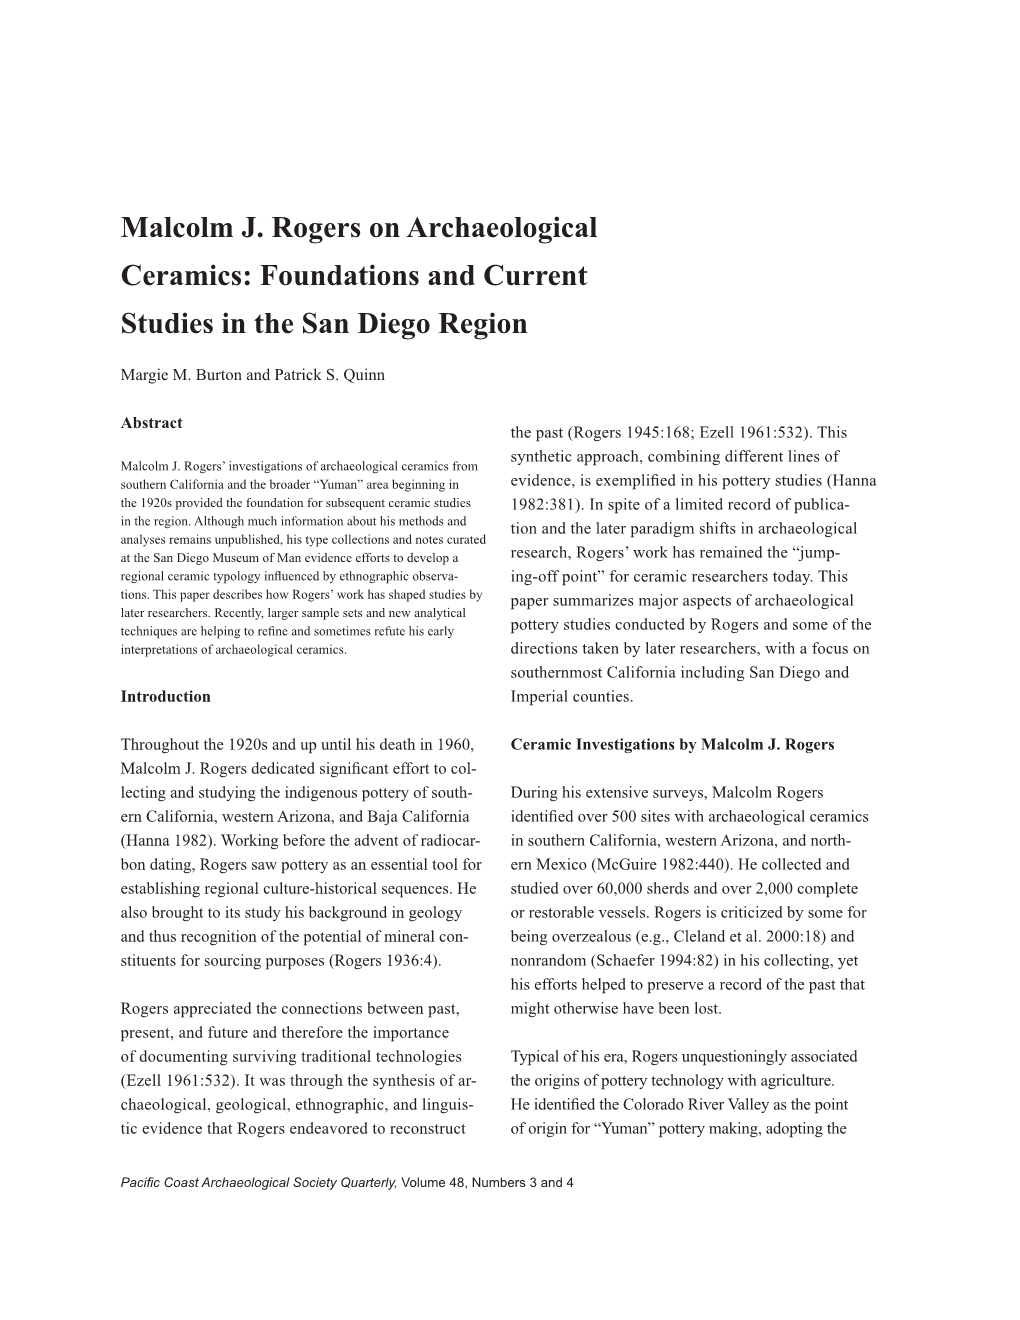 Malcolm J. Rogers on Archaeological Ceramics: Foundations and Current Studies in the San Diego Region